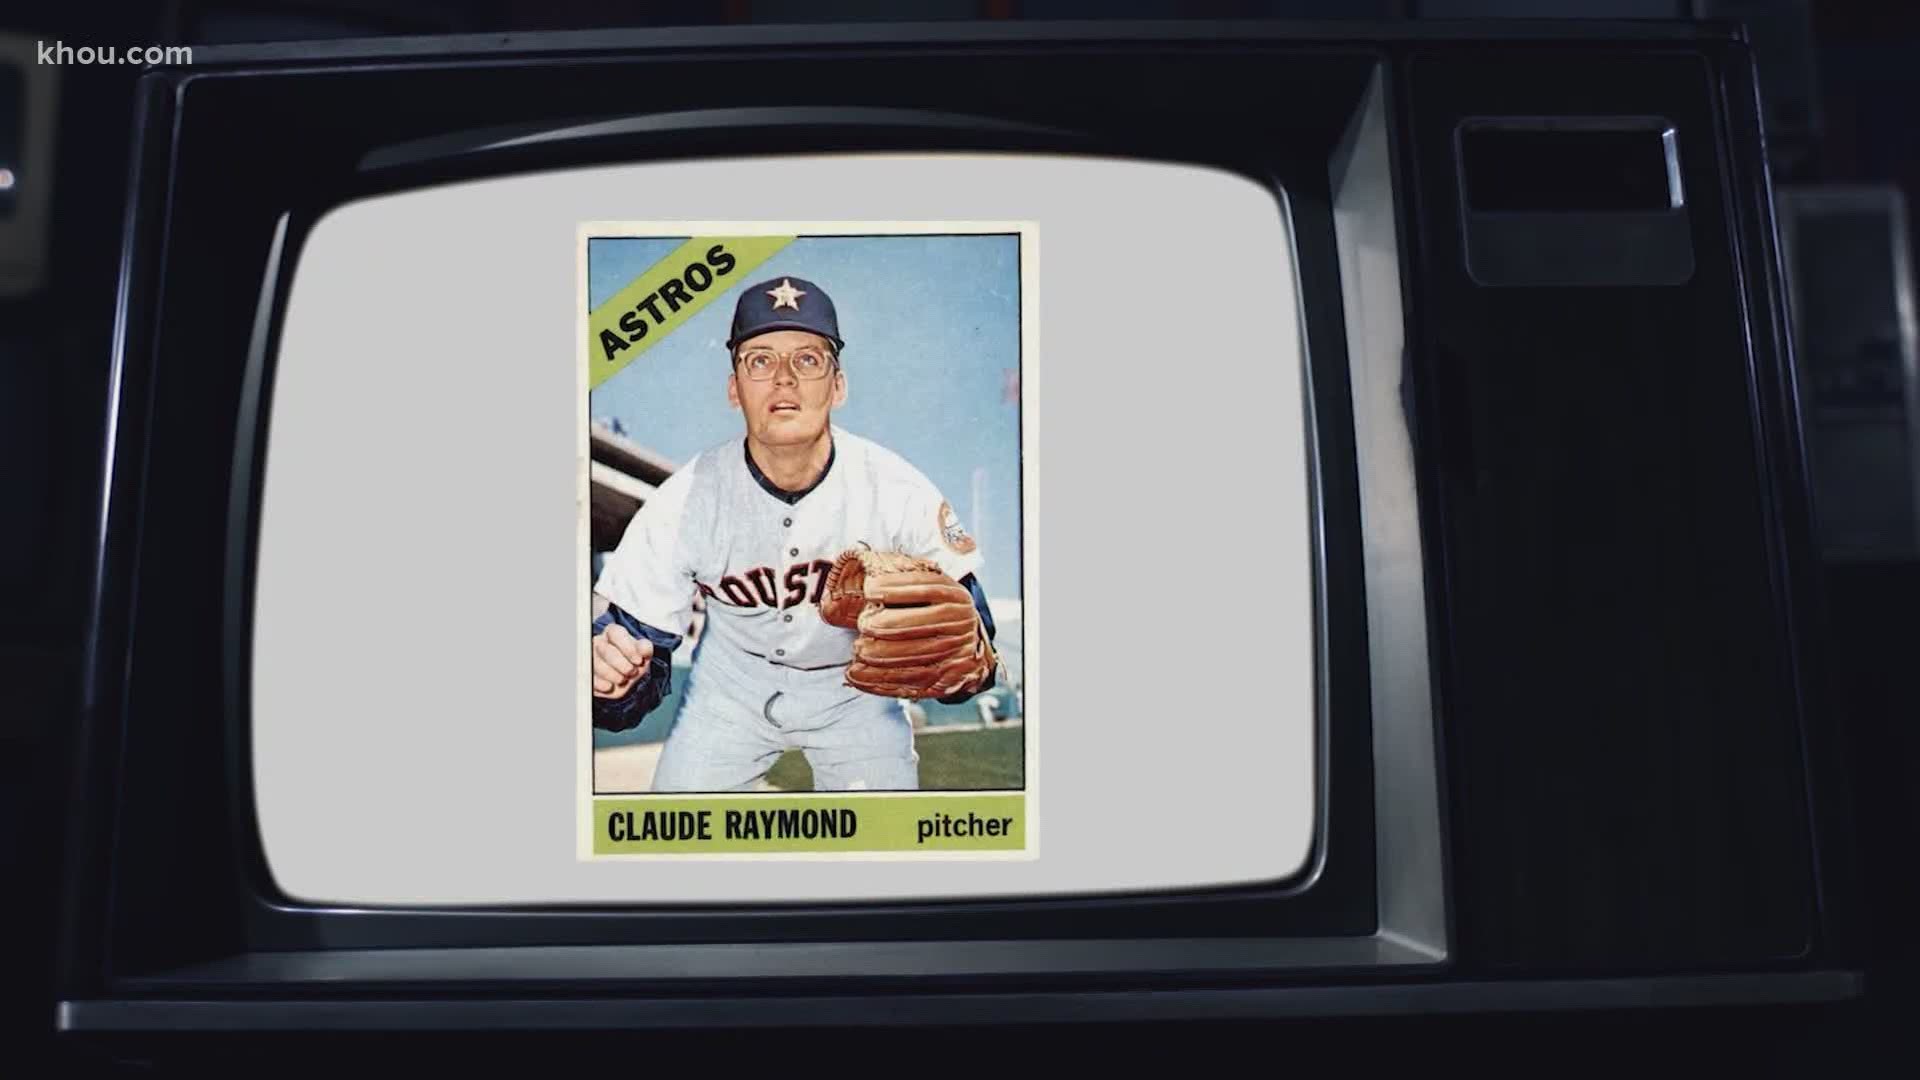 In 1966, The Topps Company issued trading card number 586 of Houston Astros relief pitcher Claude Raymond. The photo shows Claude with his pants unzipped.